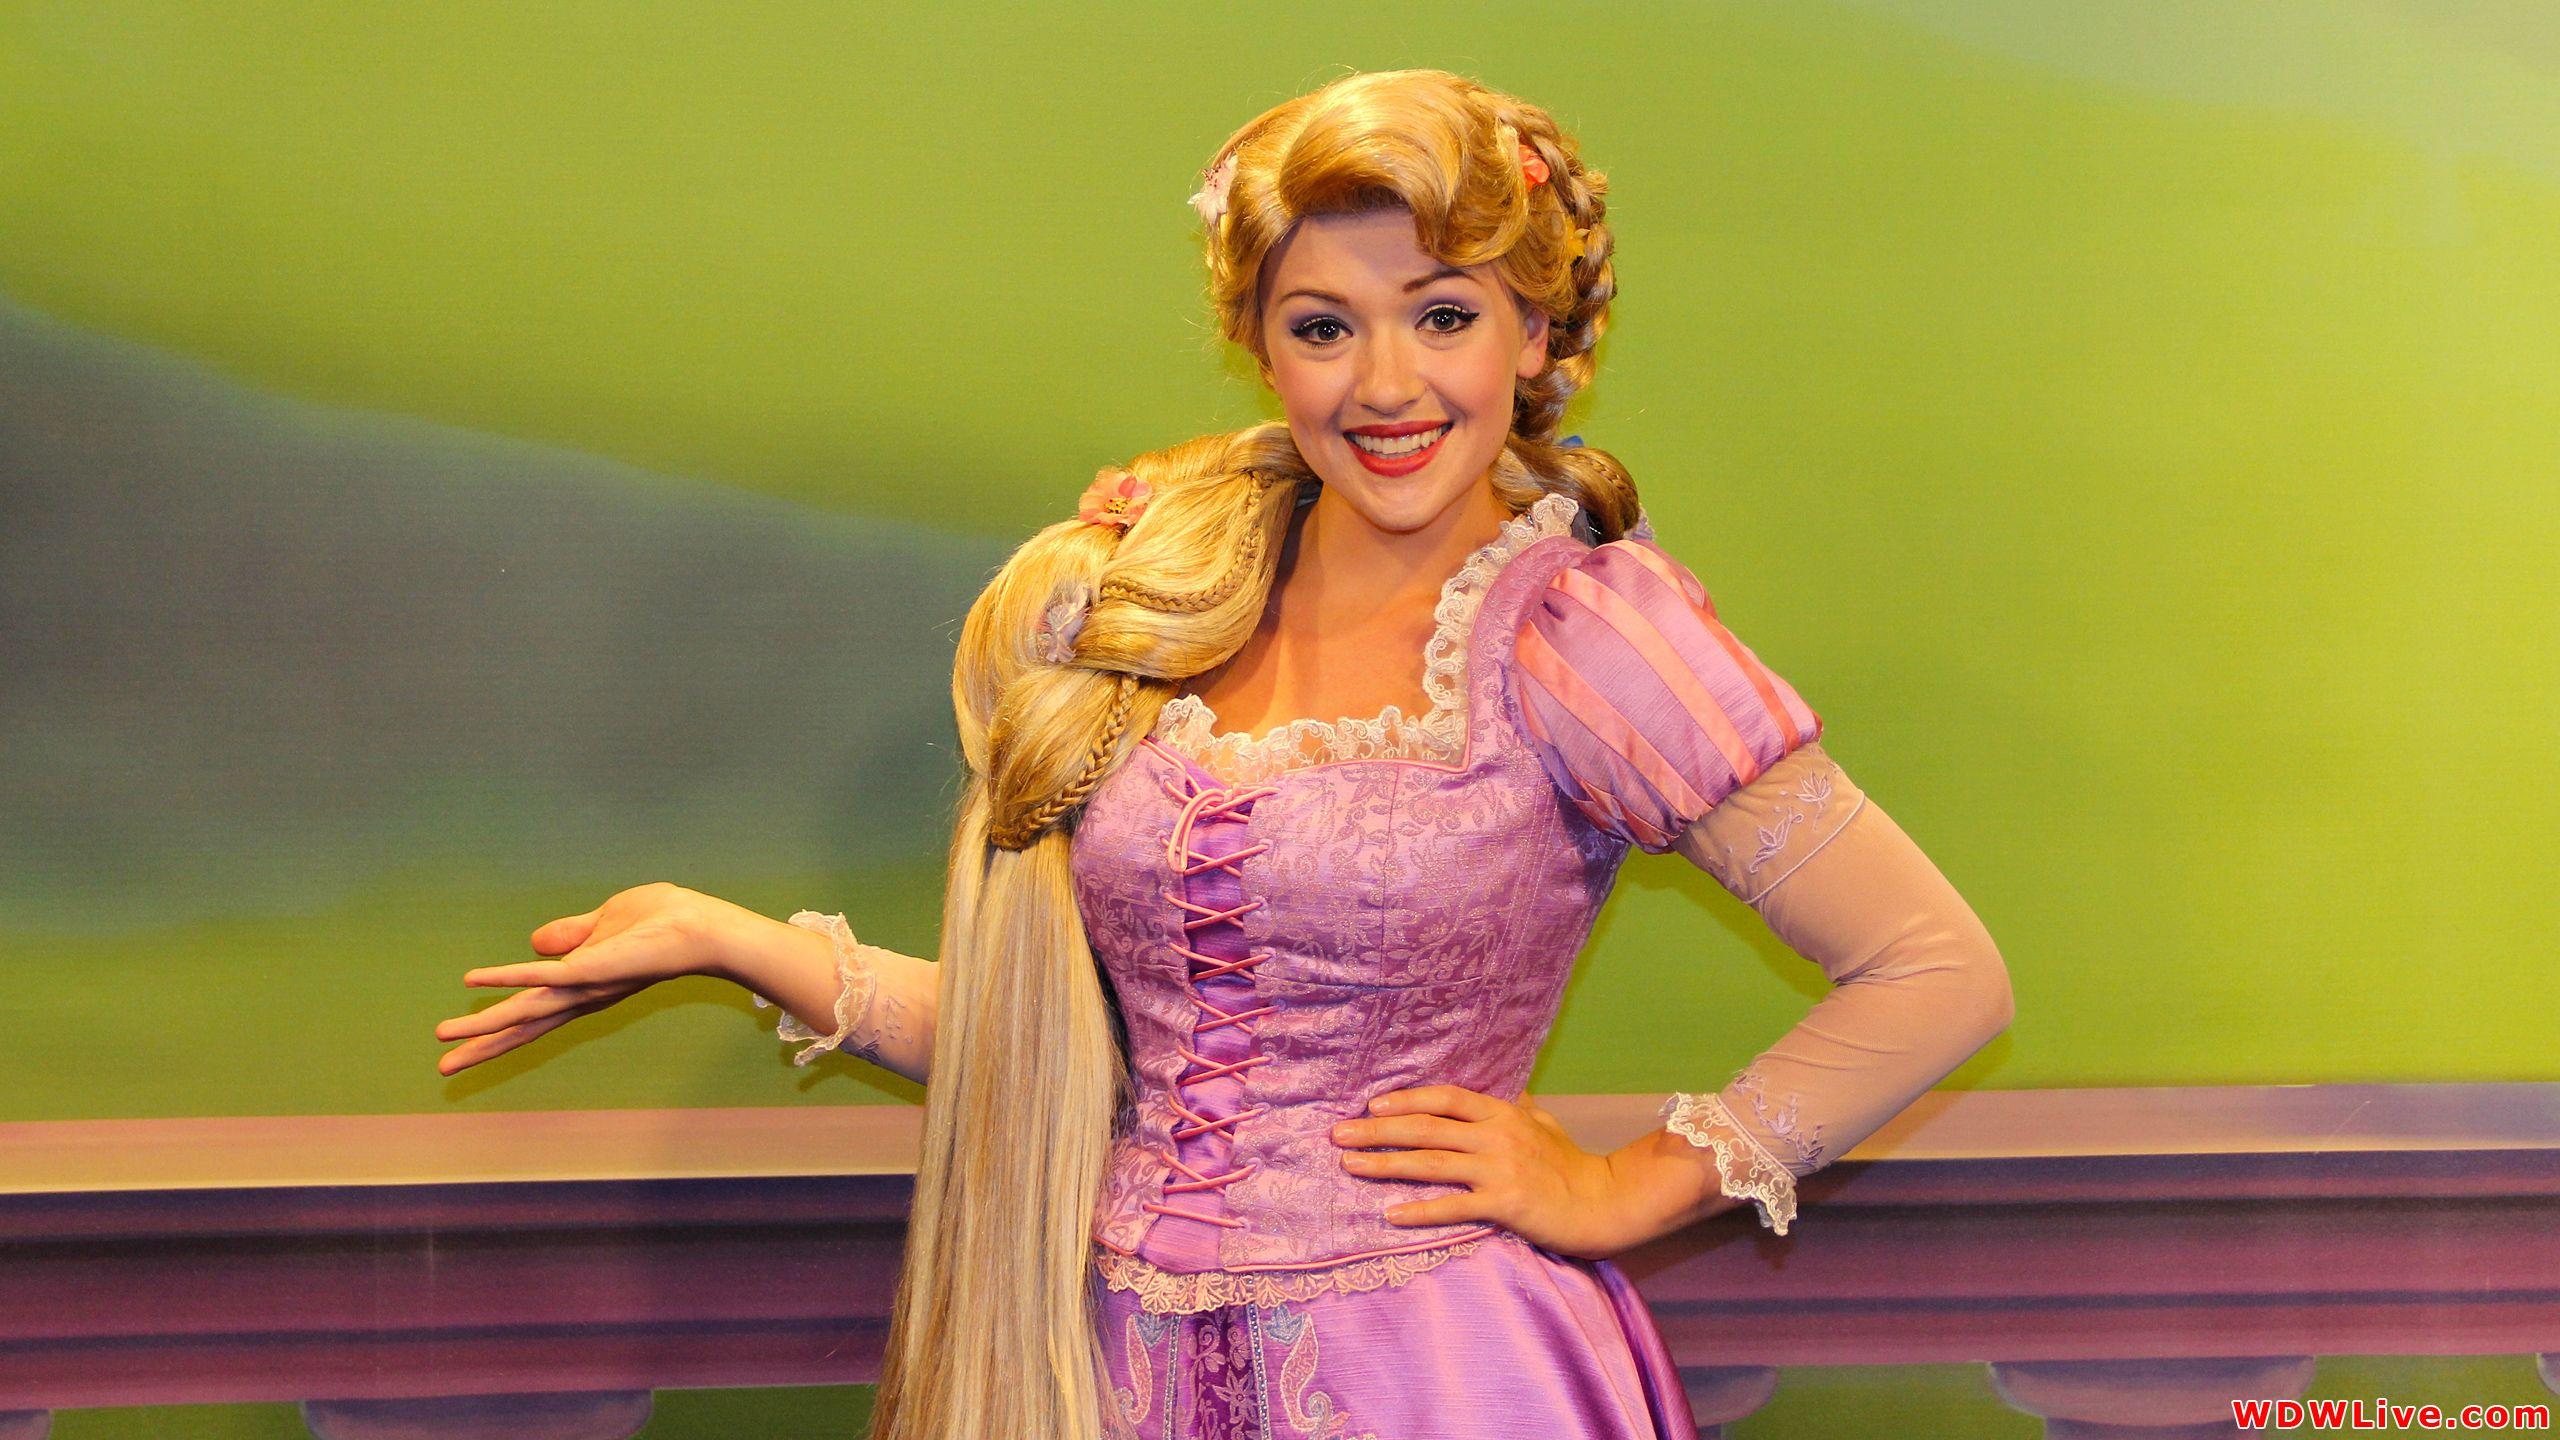 Rapunzel: Rapunzel from the Disney animated film Tangled!